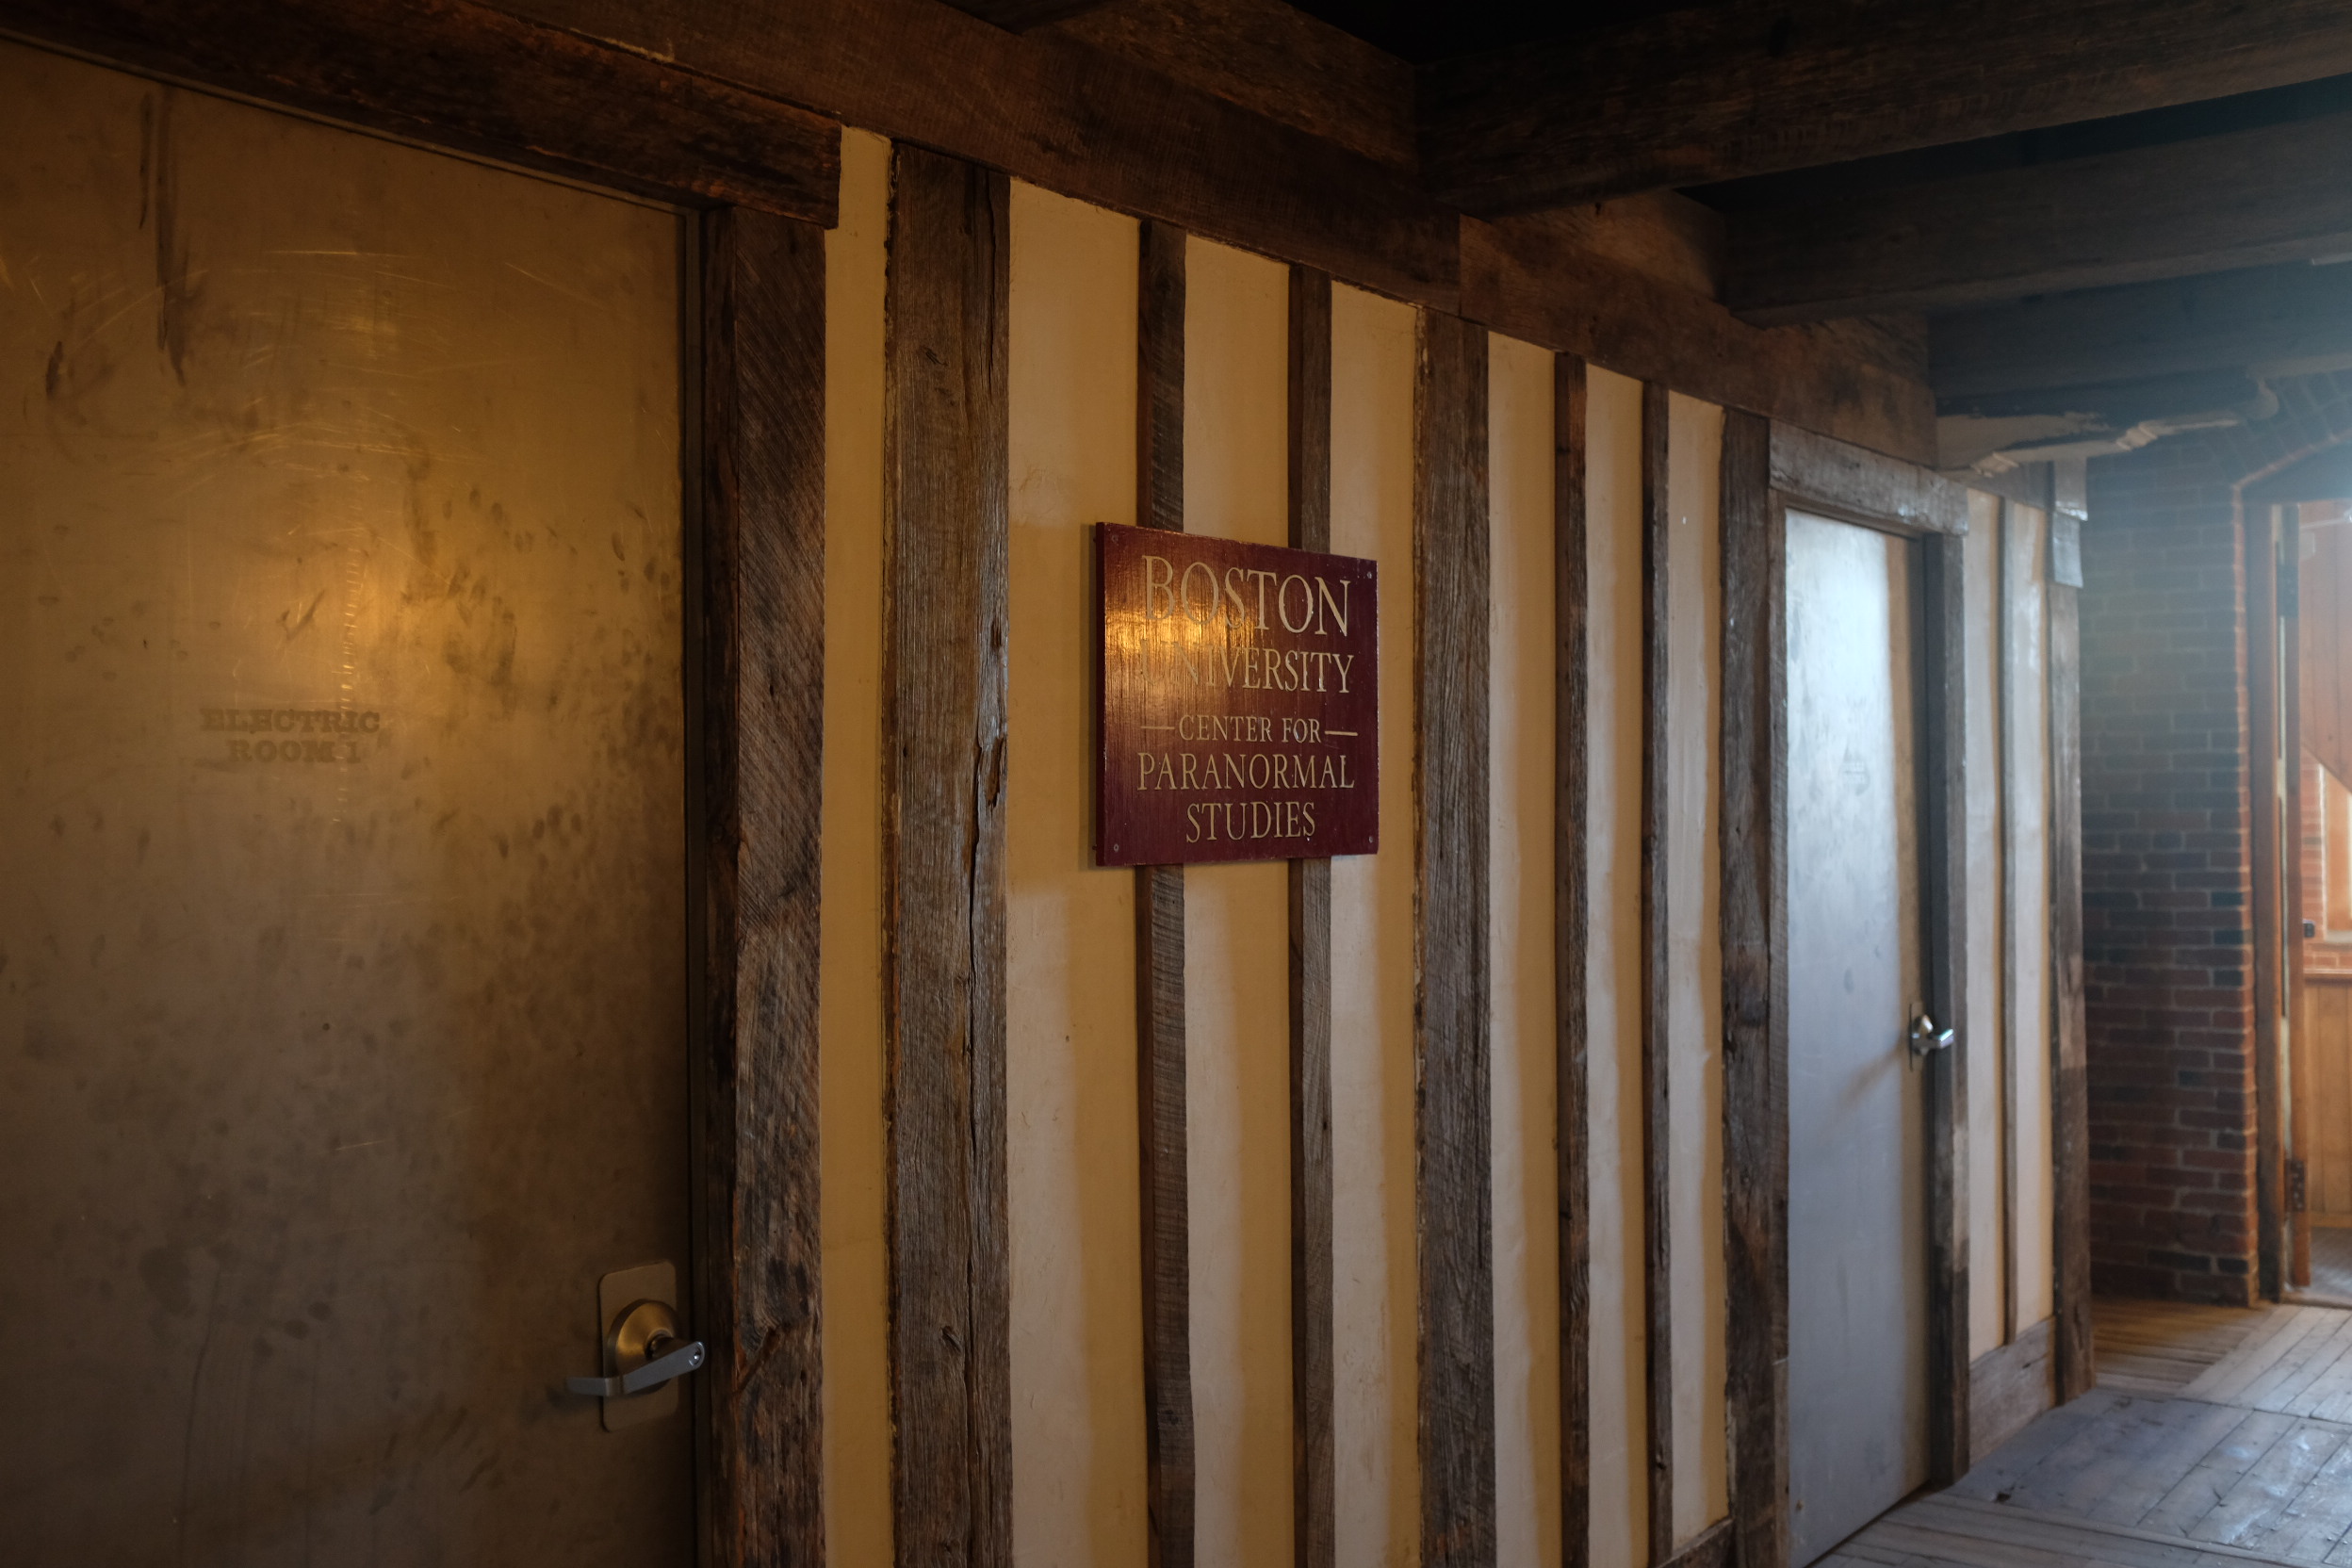 A photo from an angle of an old wooden wall which is painted yellow; a sign in the center reads 'Boston University Center for Paranormal Studies'.